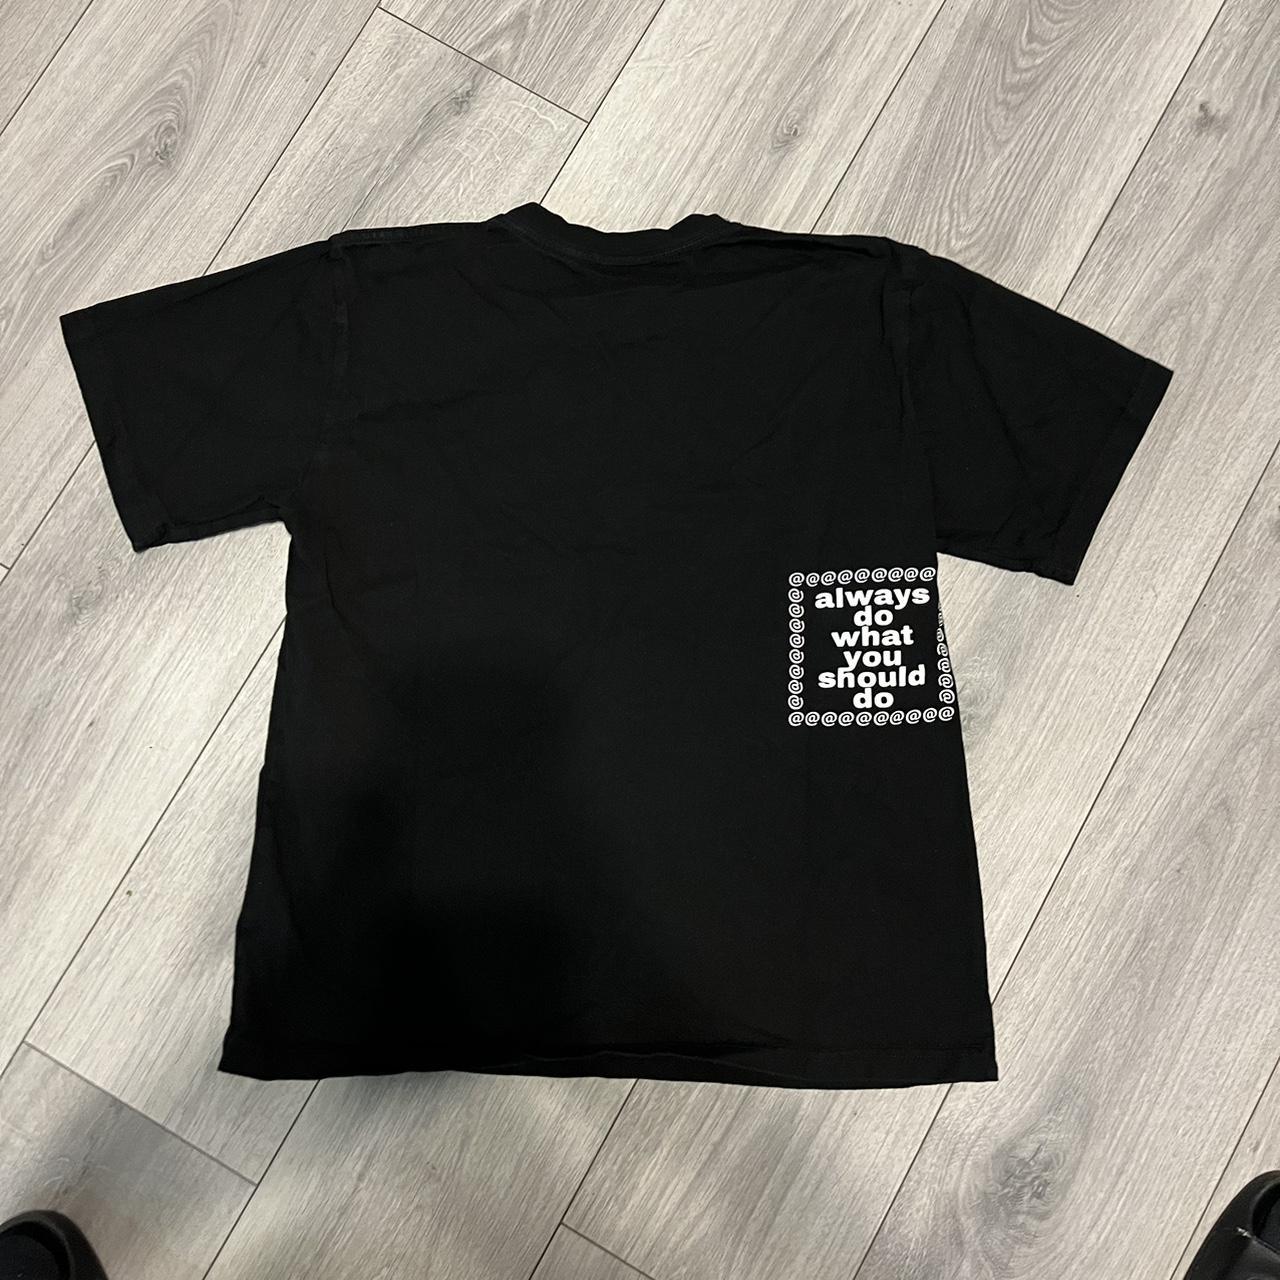 Always do what you should do adwysd t shirt in black - Depop